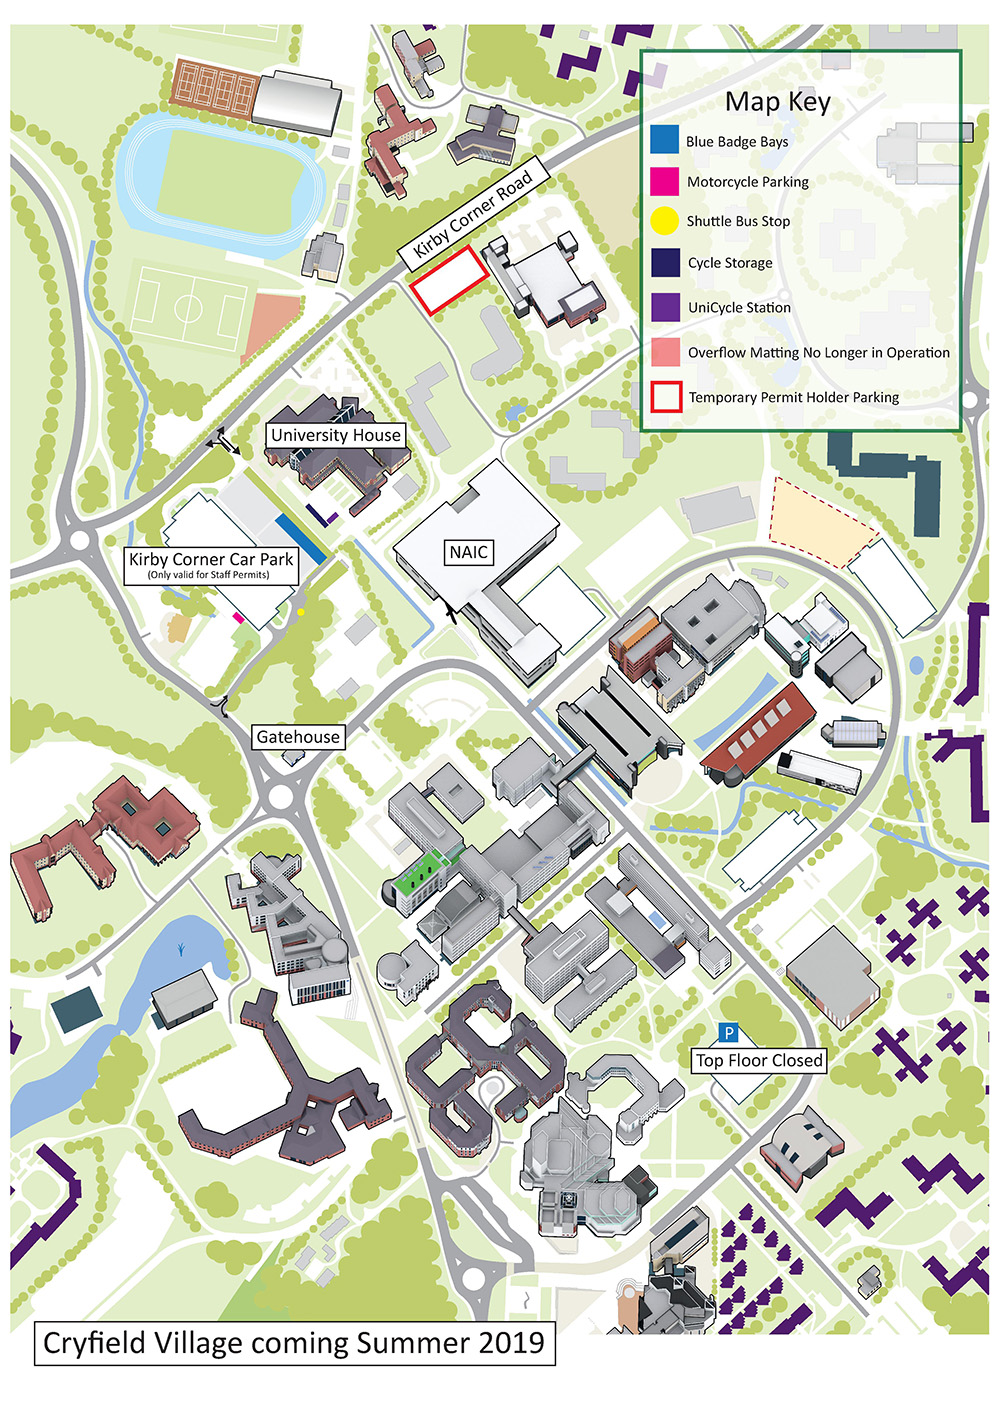 Car parking on campus map